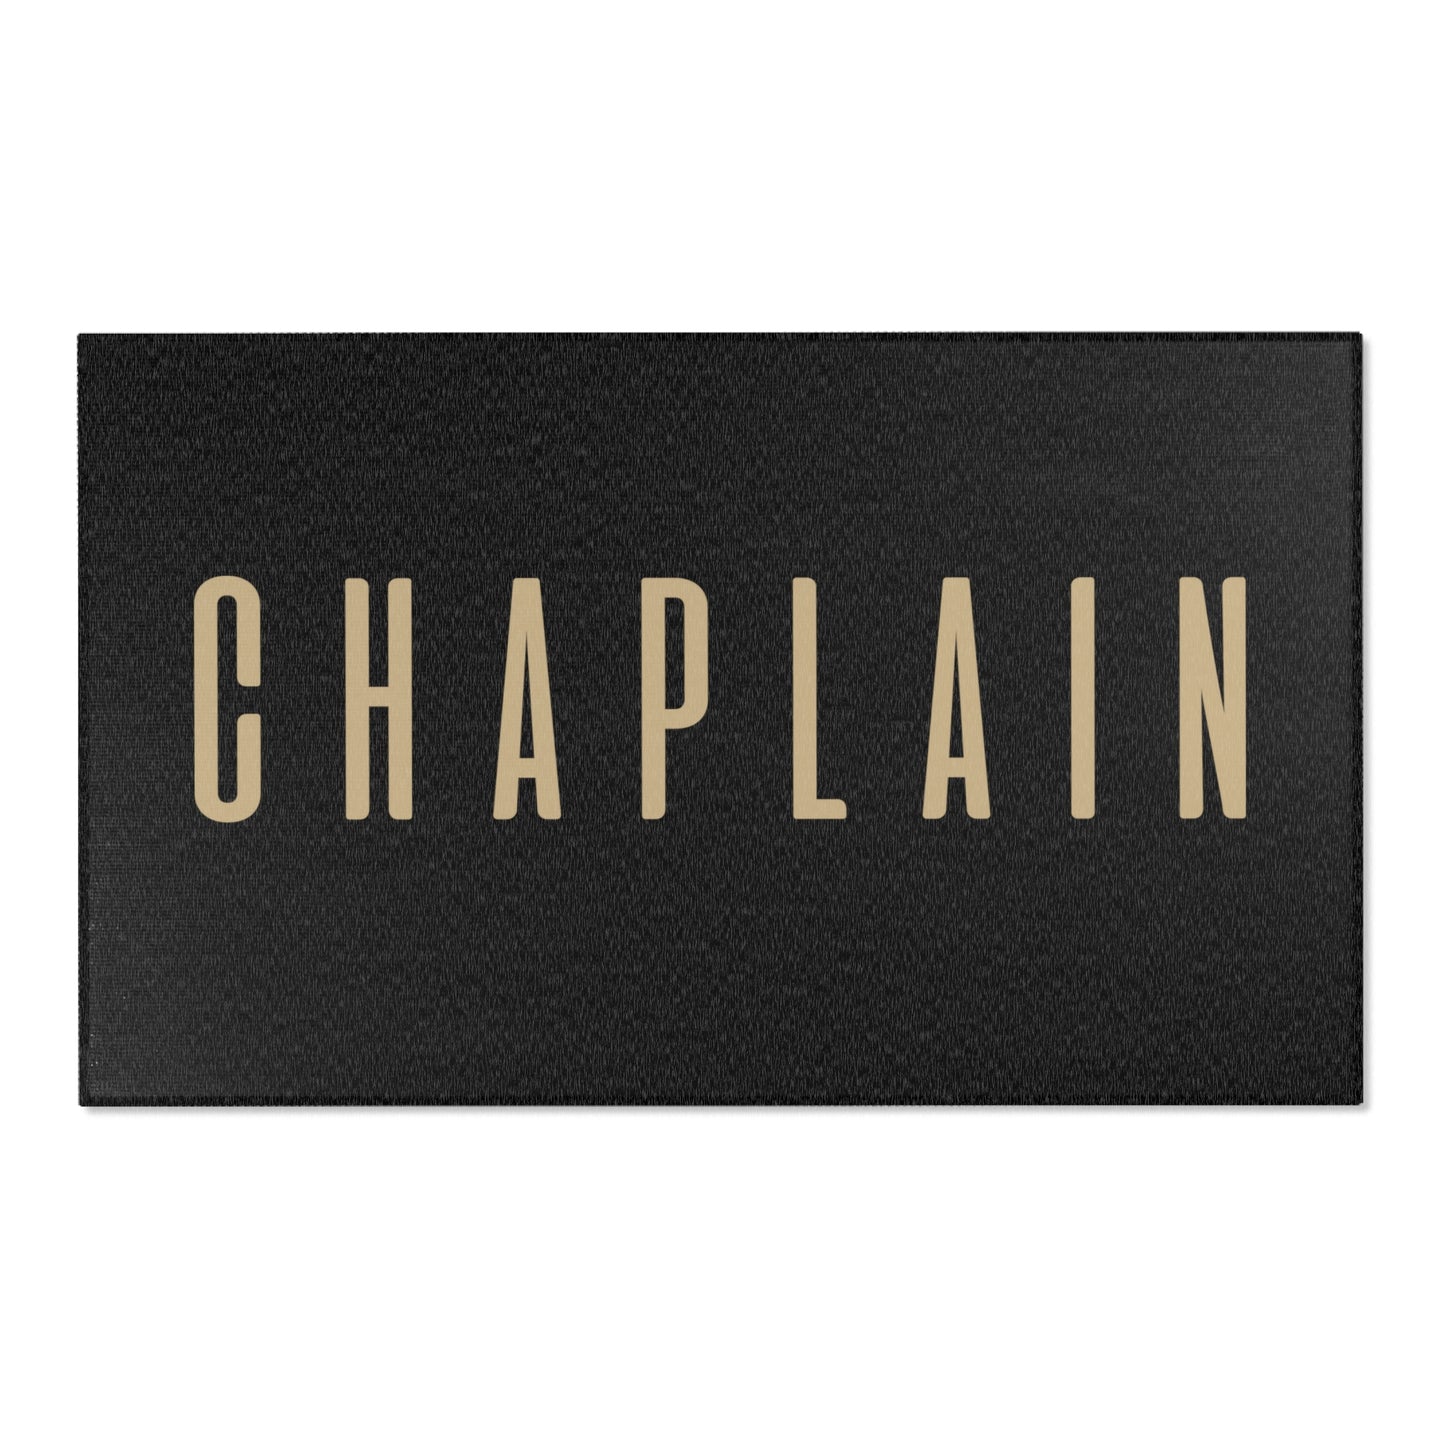 Small Area CHAPLAIN Rugs